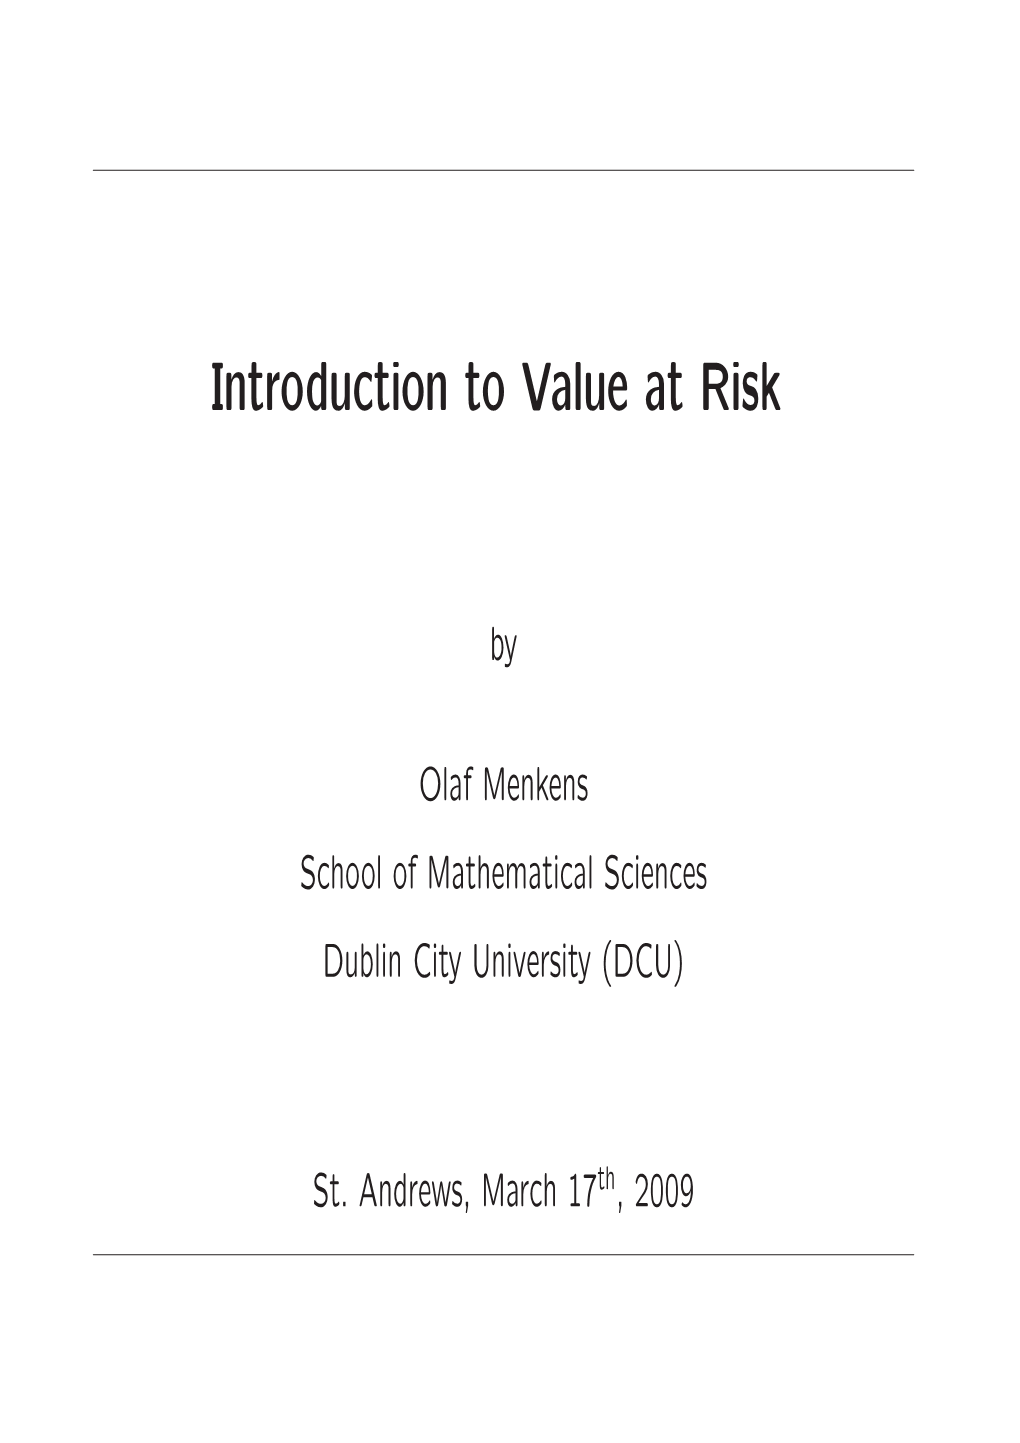 Introduction to Value at Risk